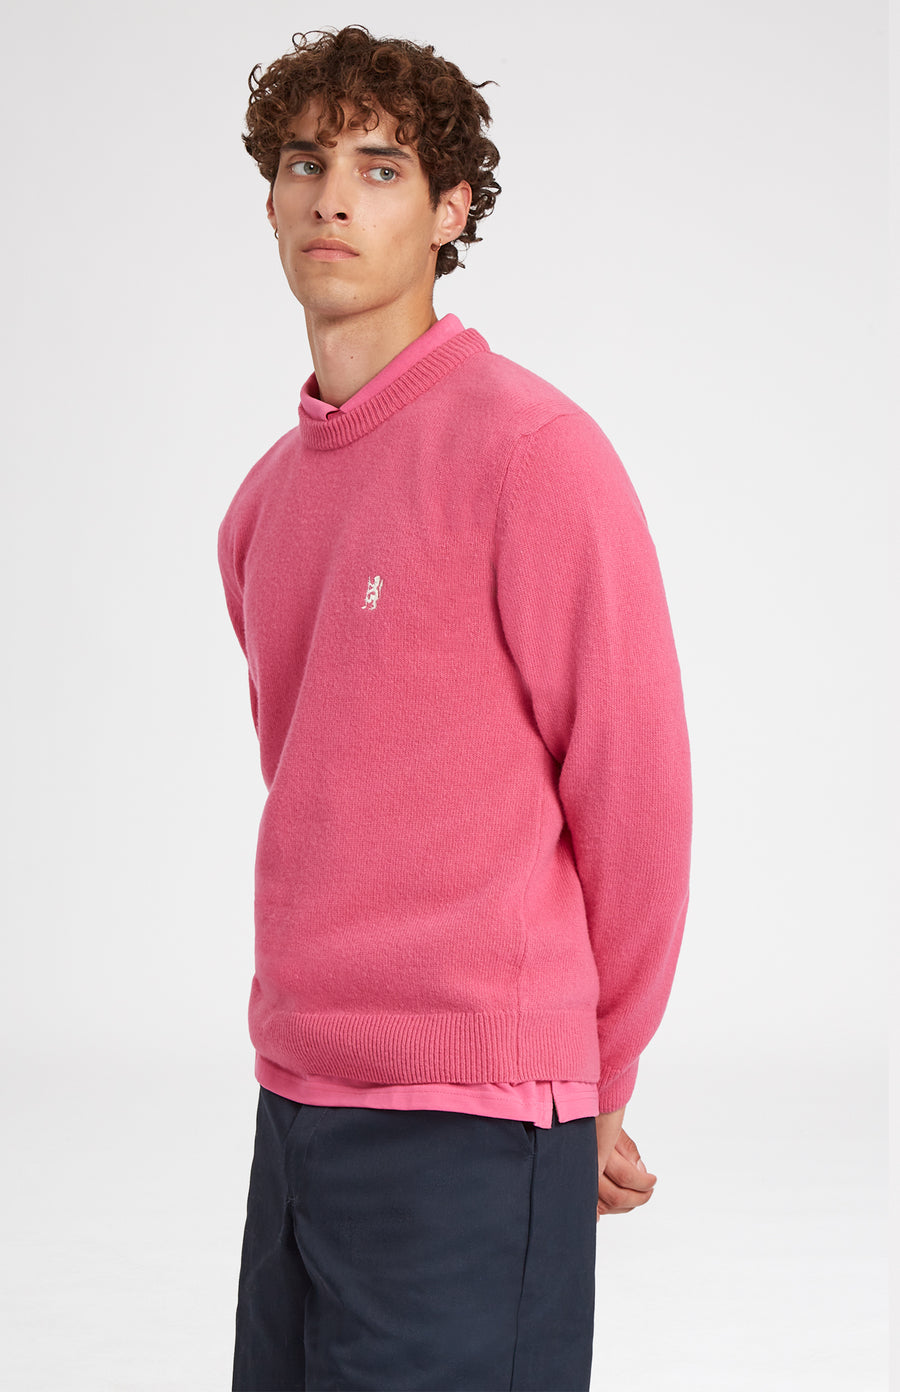 Pringle of Scotland Round Neck Lambswool Golf Jumper In Heather Pink